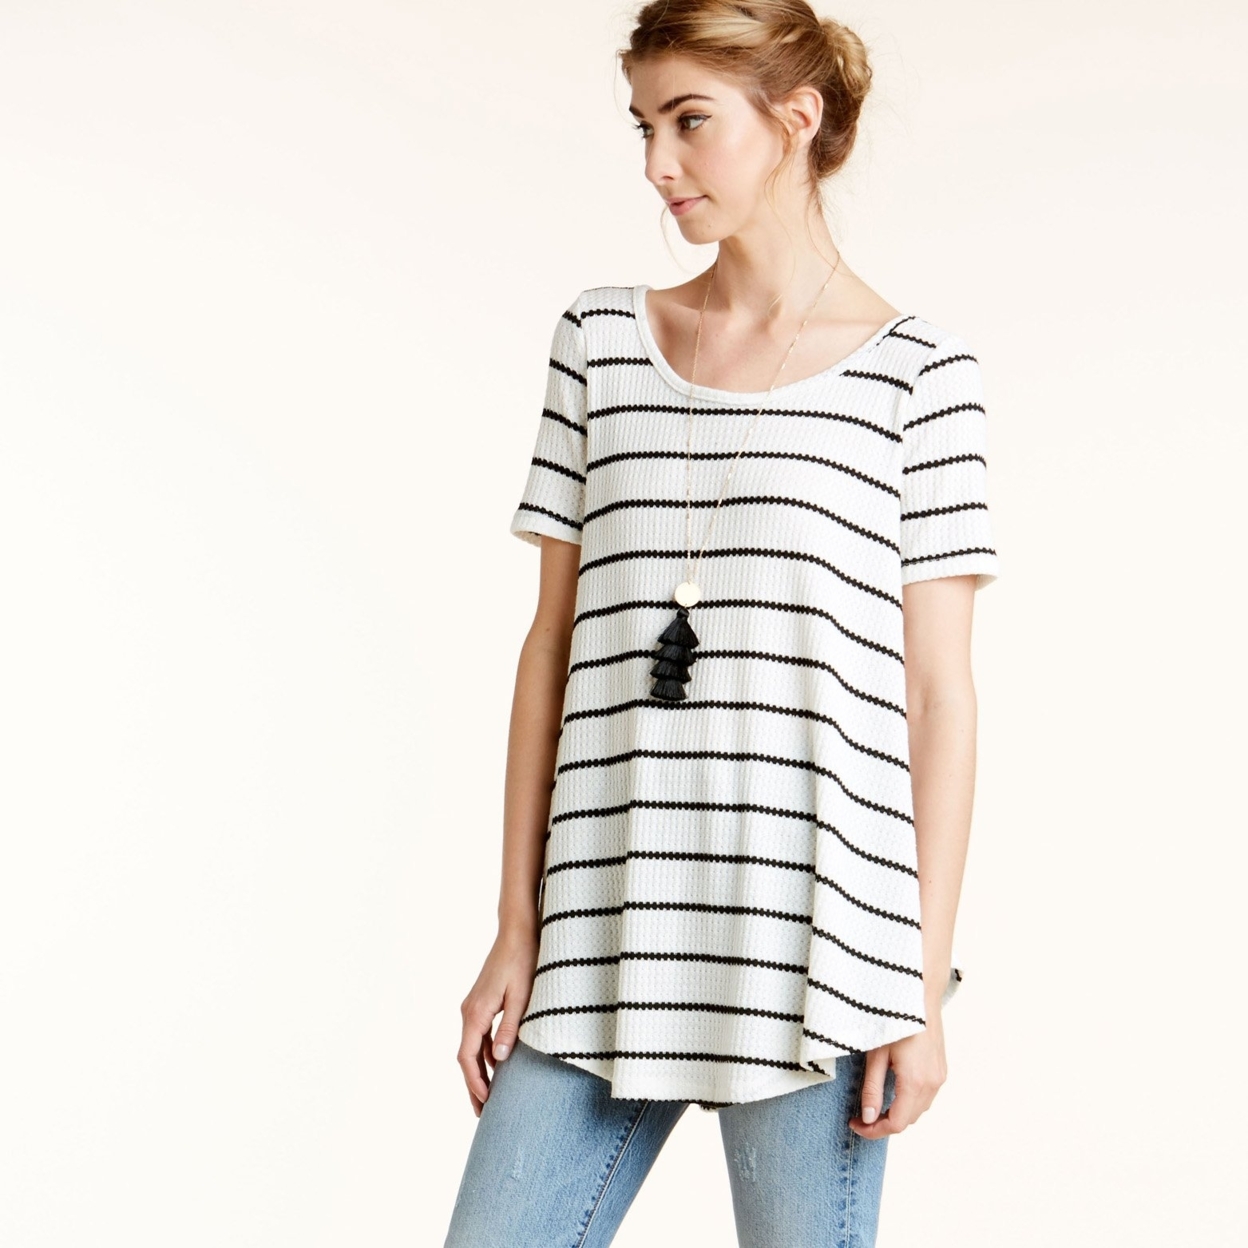 Totter Stripe Waffle Knit Top - Black, Small (2-6)